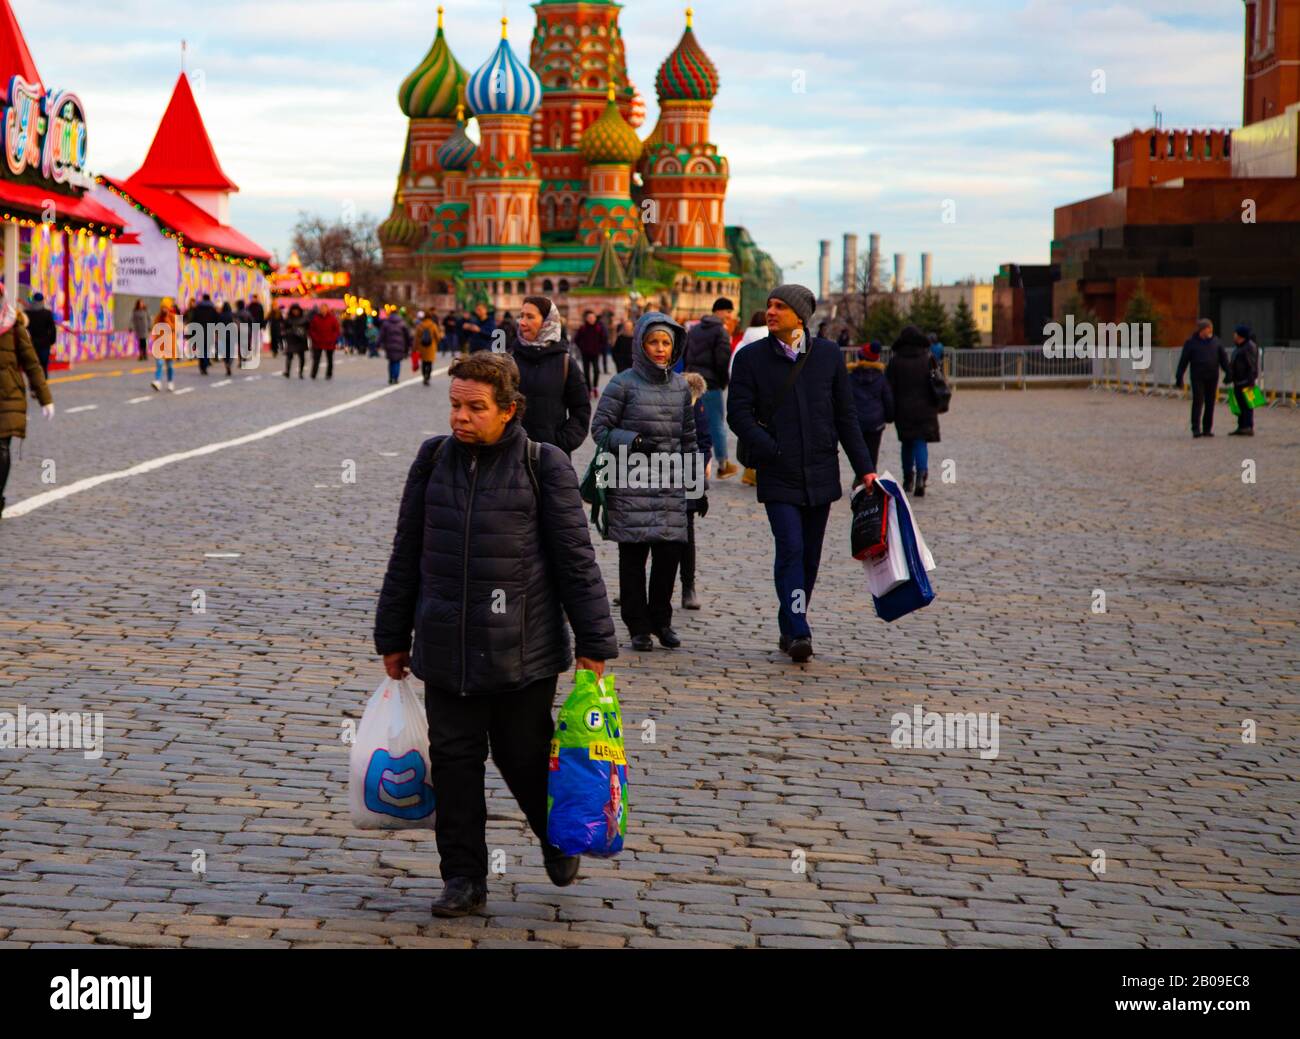 Red Square in Moscow and people, mausoleum, winter 2020 Stock Photo